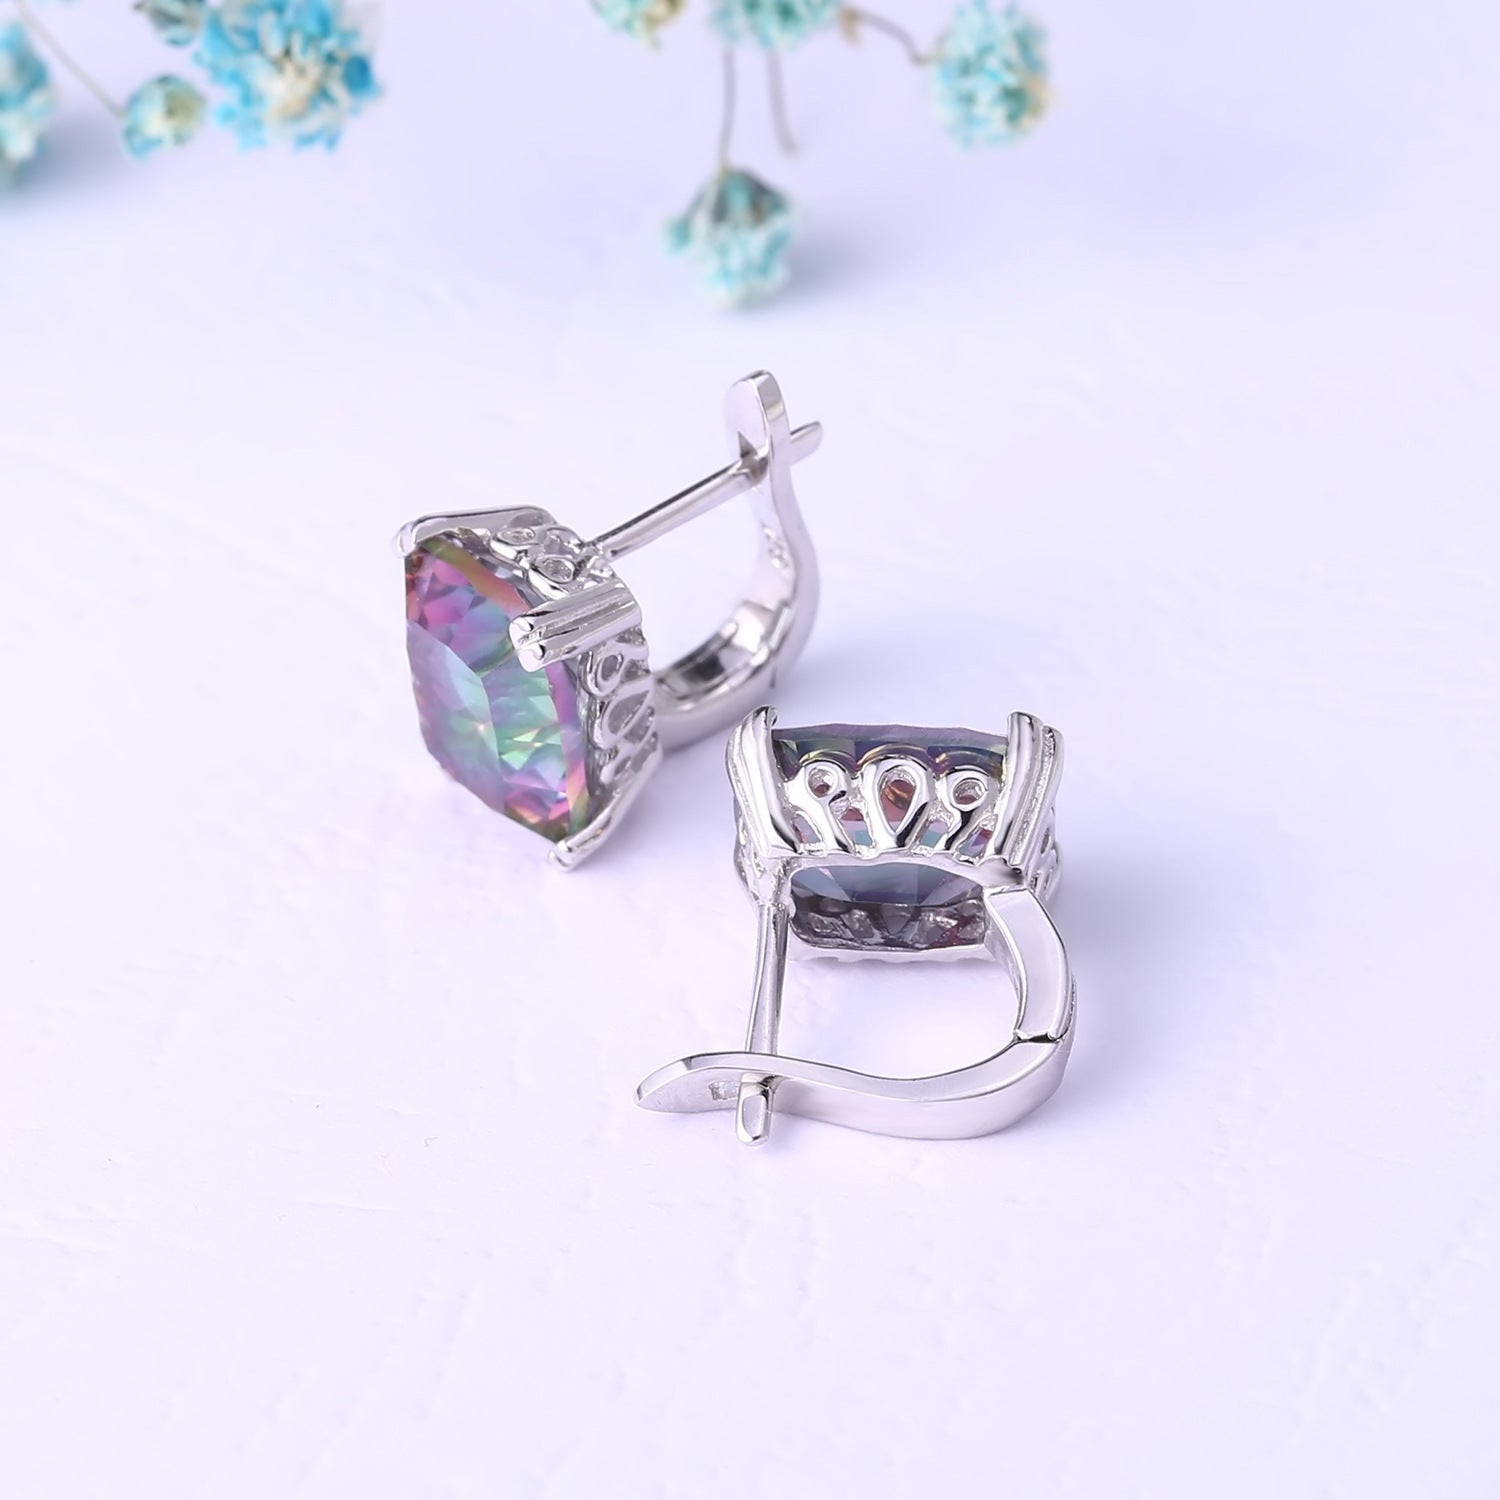 Colourful Crystal Square Sterling Silver Studs Earrings for Women